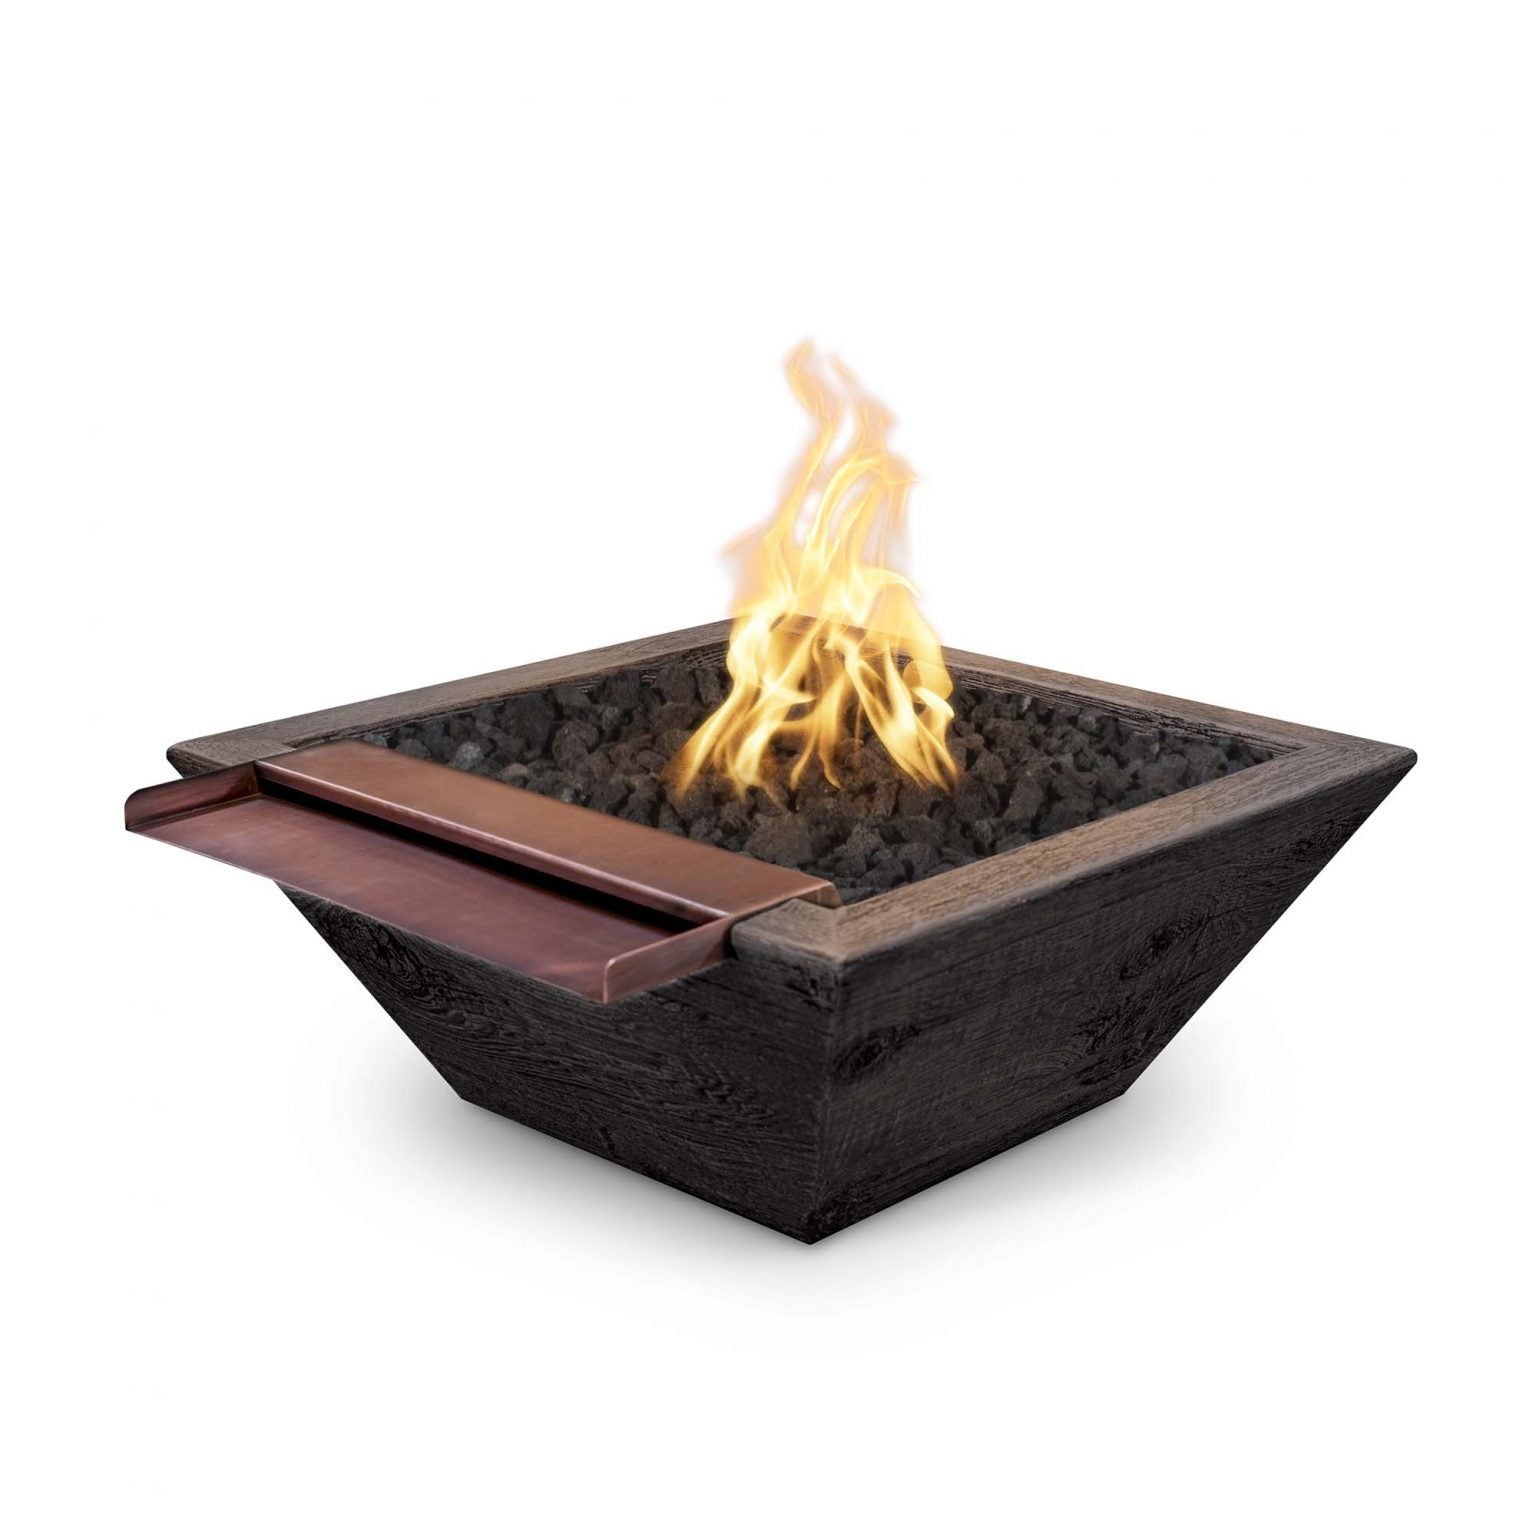 TOP Fires Maya Wood Grain Fire & Wide Spill Water Bowl by The Outdoor Plus - Majestic Fountains